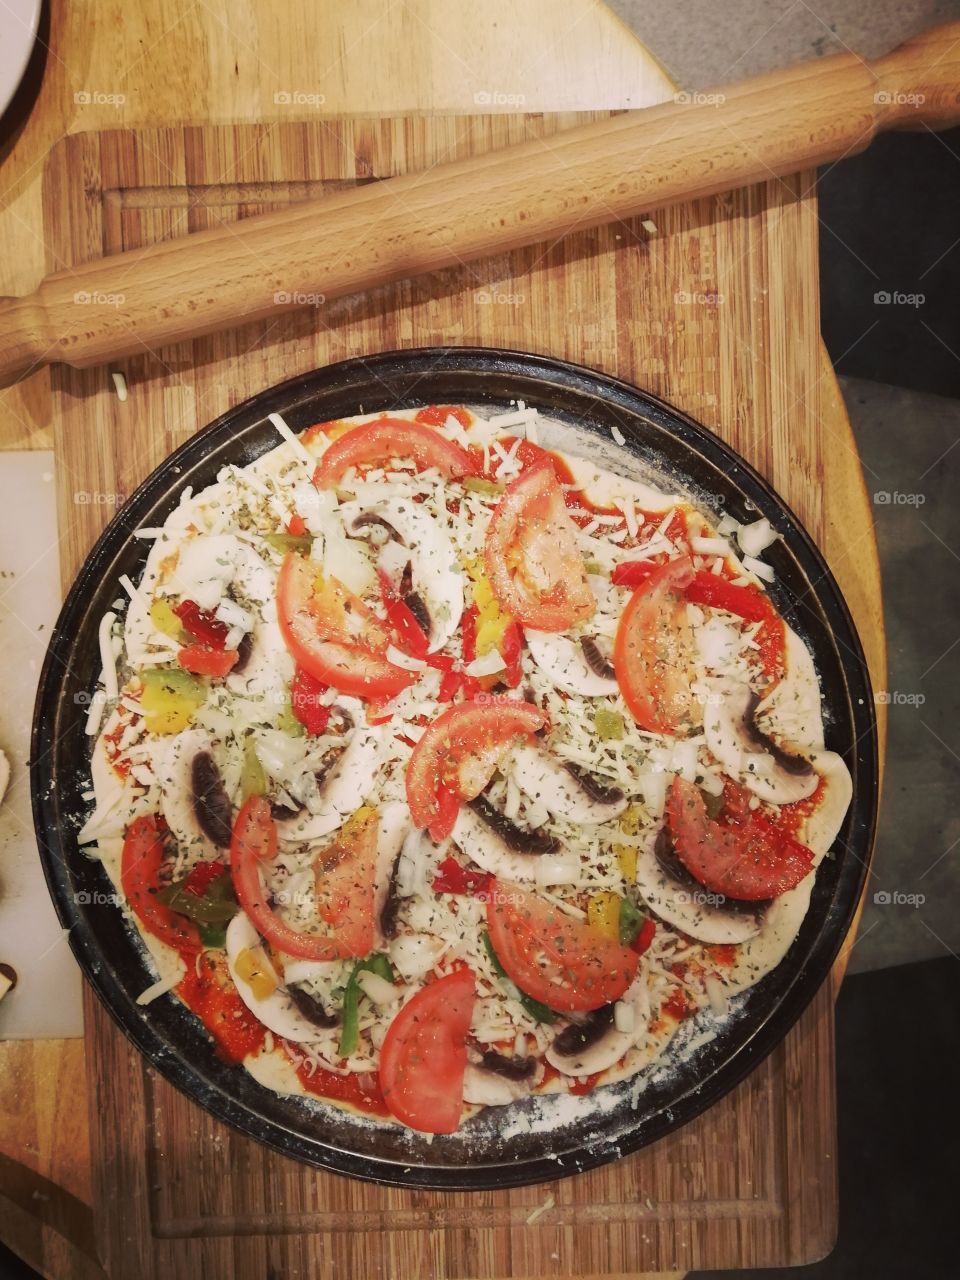 Pizza, full of heart, home made